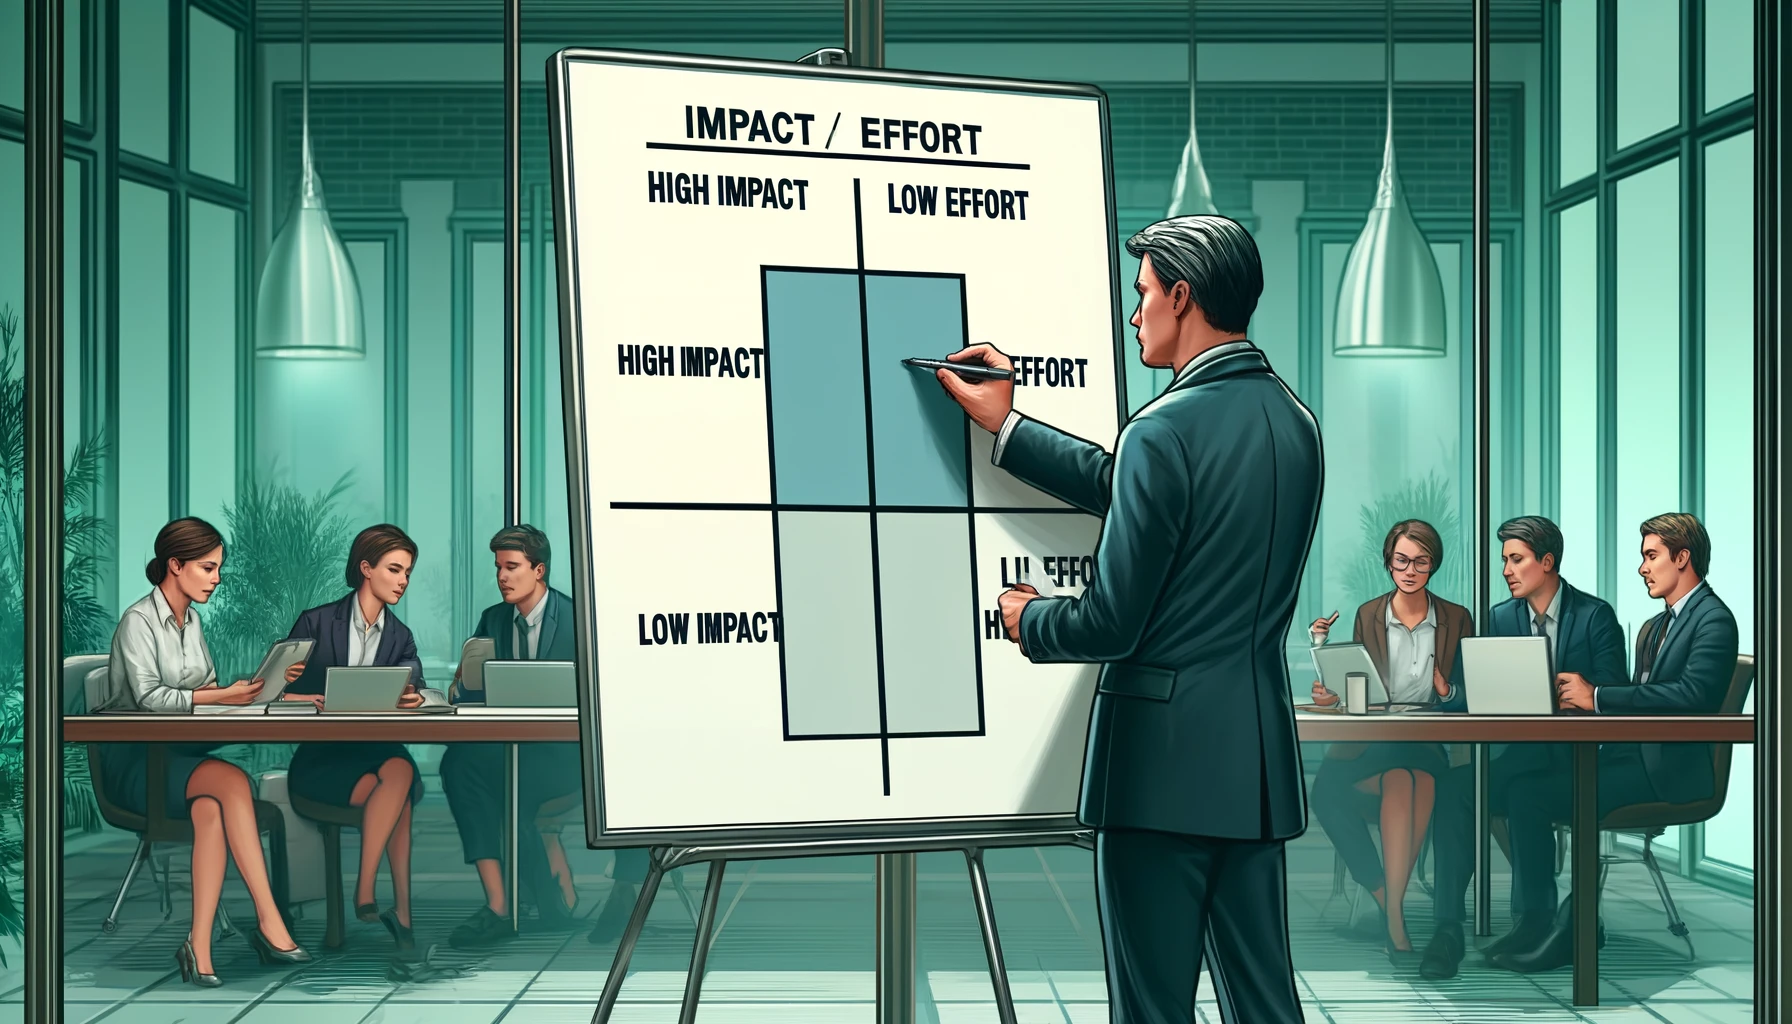 An illustrated image of a business leader using an Impact/Effort Matrix in a modern office setting. The leader, depicted in a professional environment, marks tasks into labeled quadrants: High Impact, Low Effort; High Impact, High Effort; Low Impact, Low Effort; and Low Impact, High Effort. Other team members discuss in the background, enhancing the collaborative atmosphere.